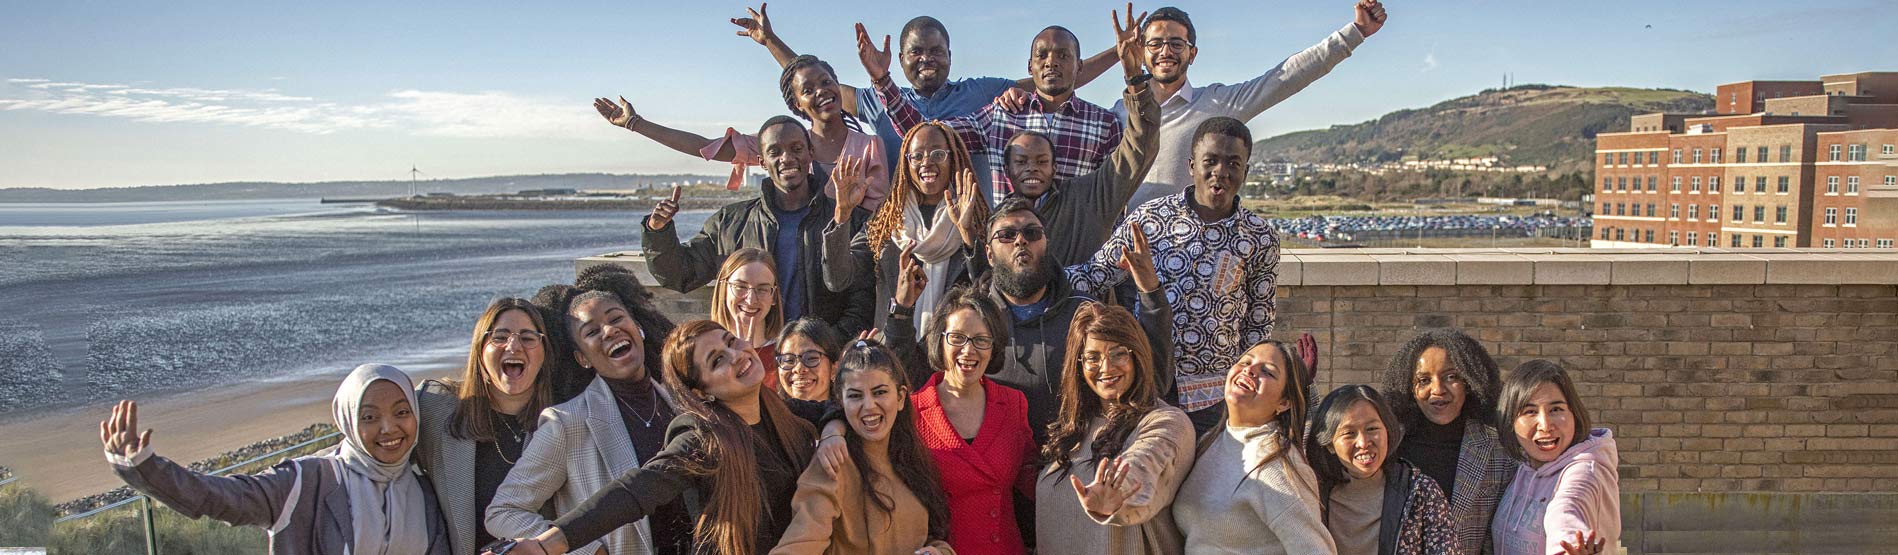 Photo of the 2021 Chevening Scholars waving and posing on a balcony over looking the Bay Campus Beach and buildings 